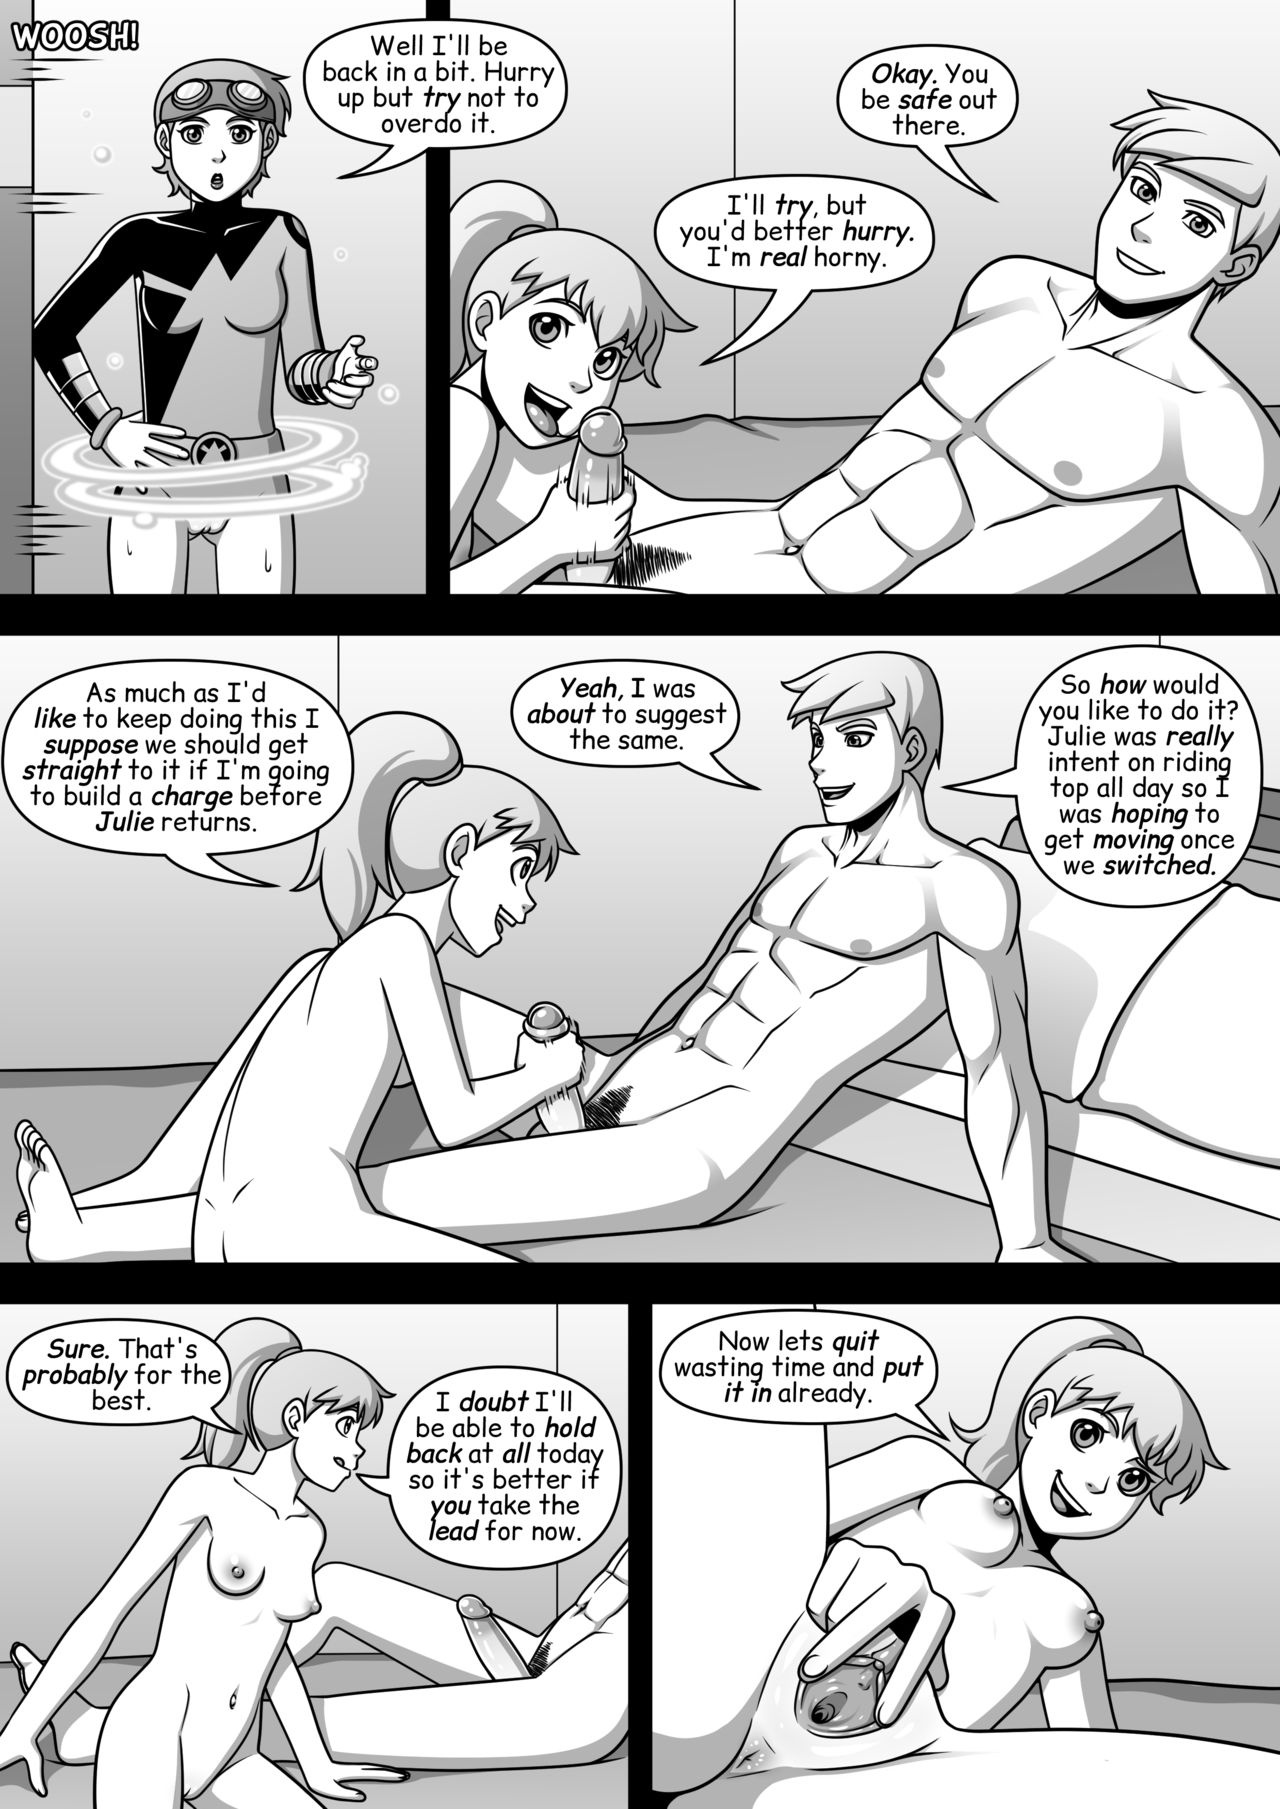 Power Pack - New Beginnings porn comics Oral sex, Anal Sex, Double Penetration, Group Sex, Masturbation, Sci-Fi, Sex Toys